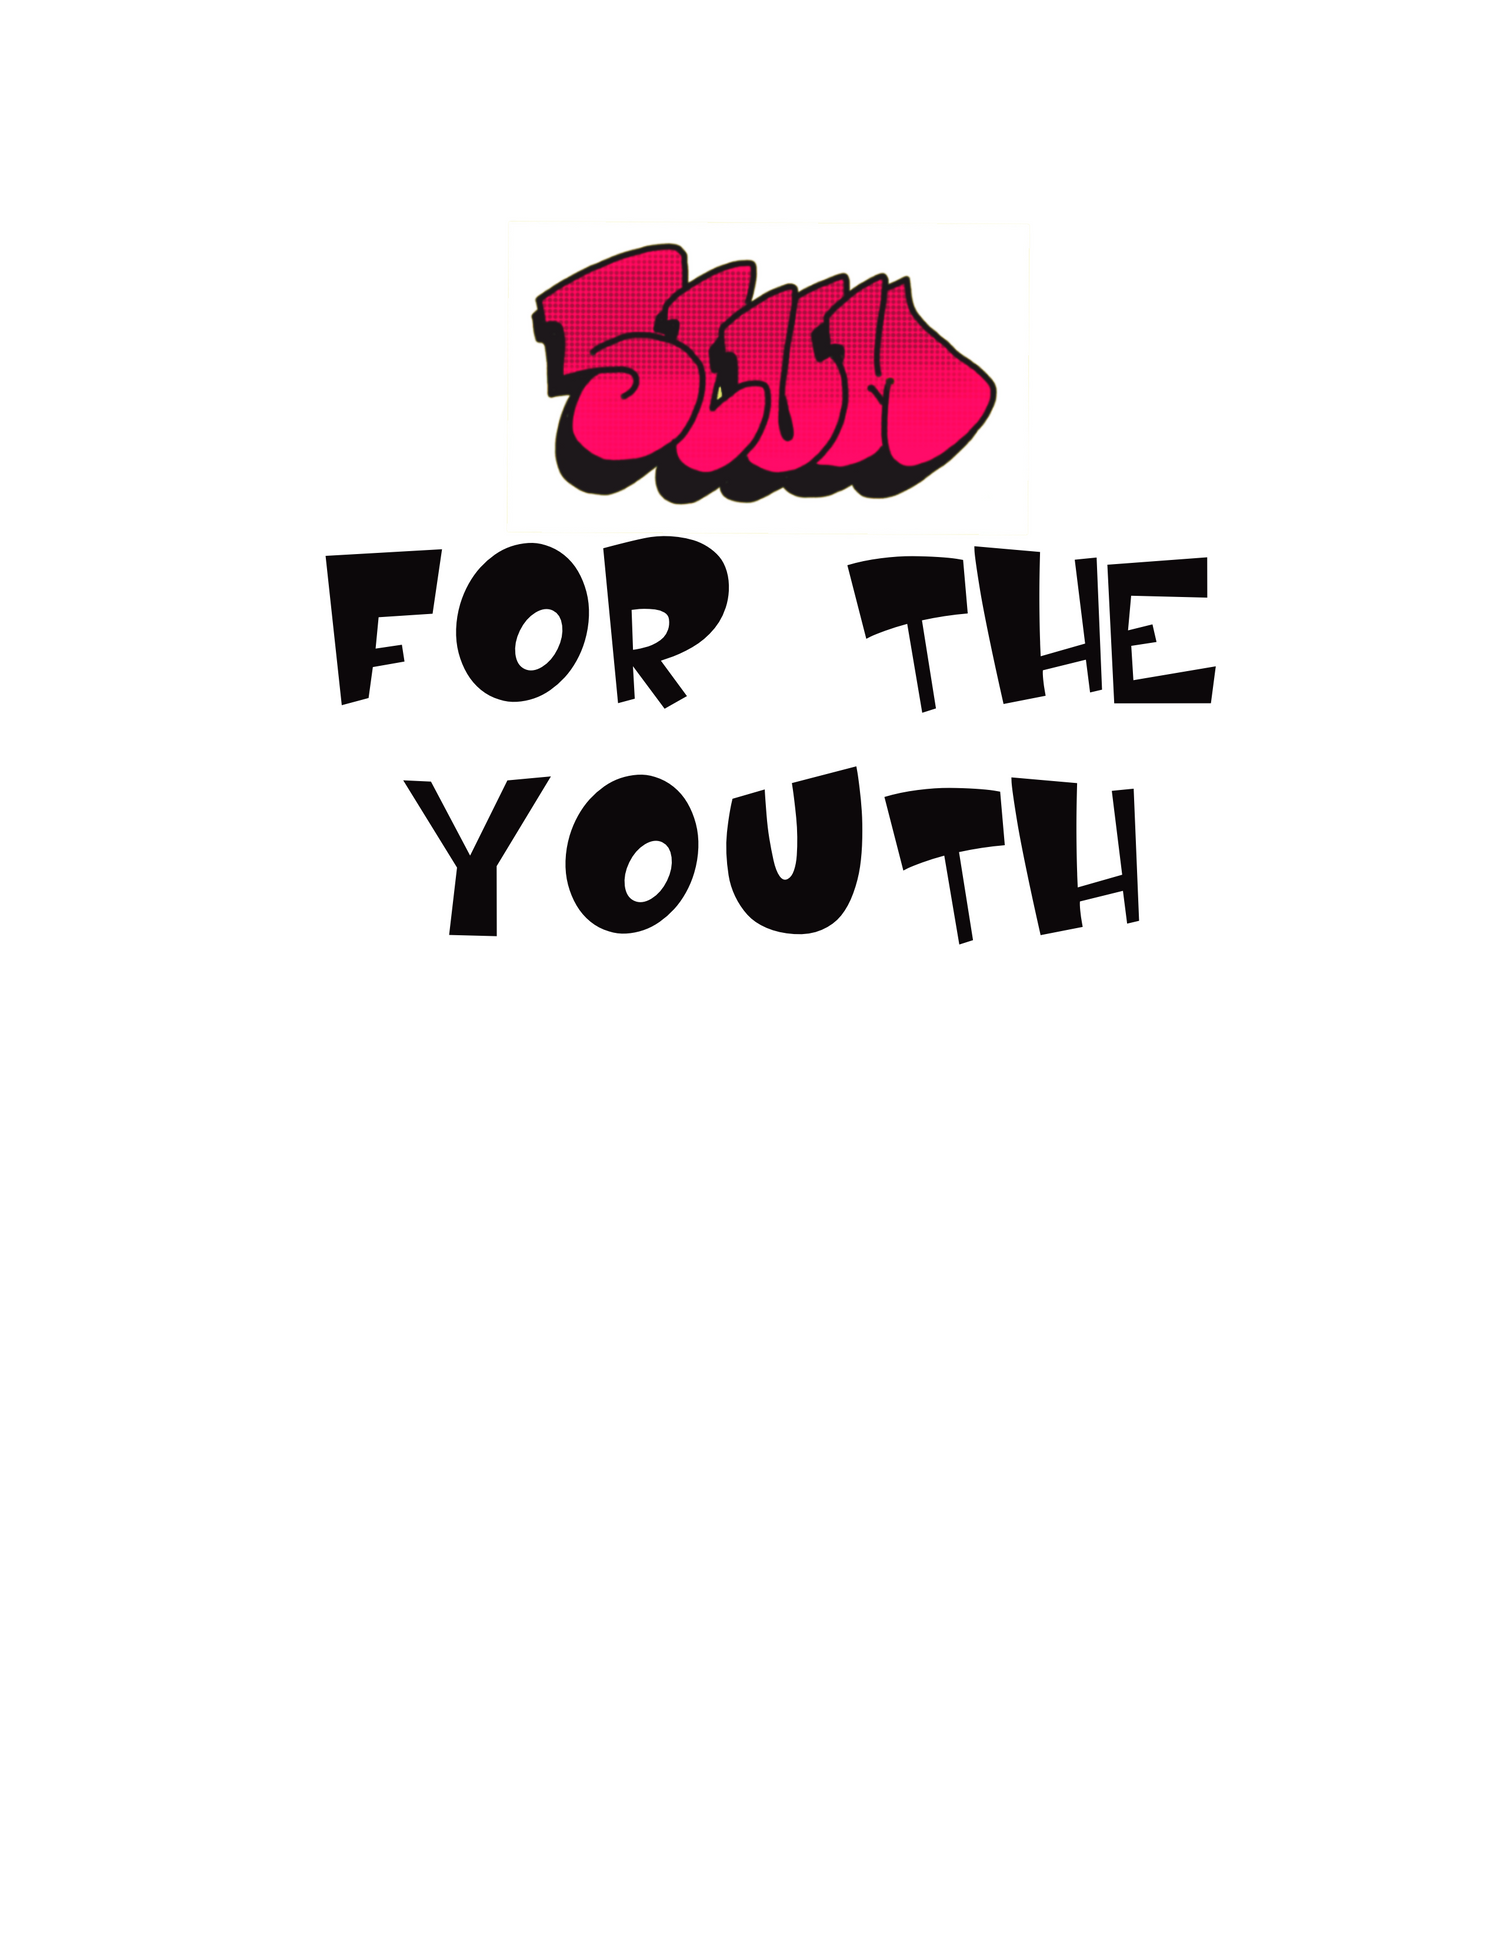 For the youth